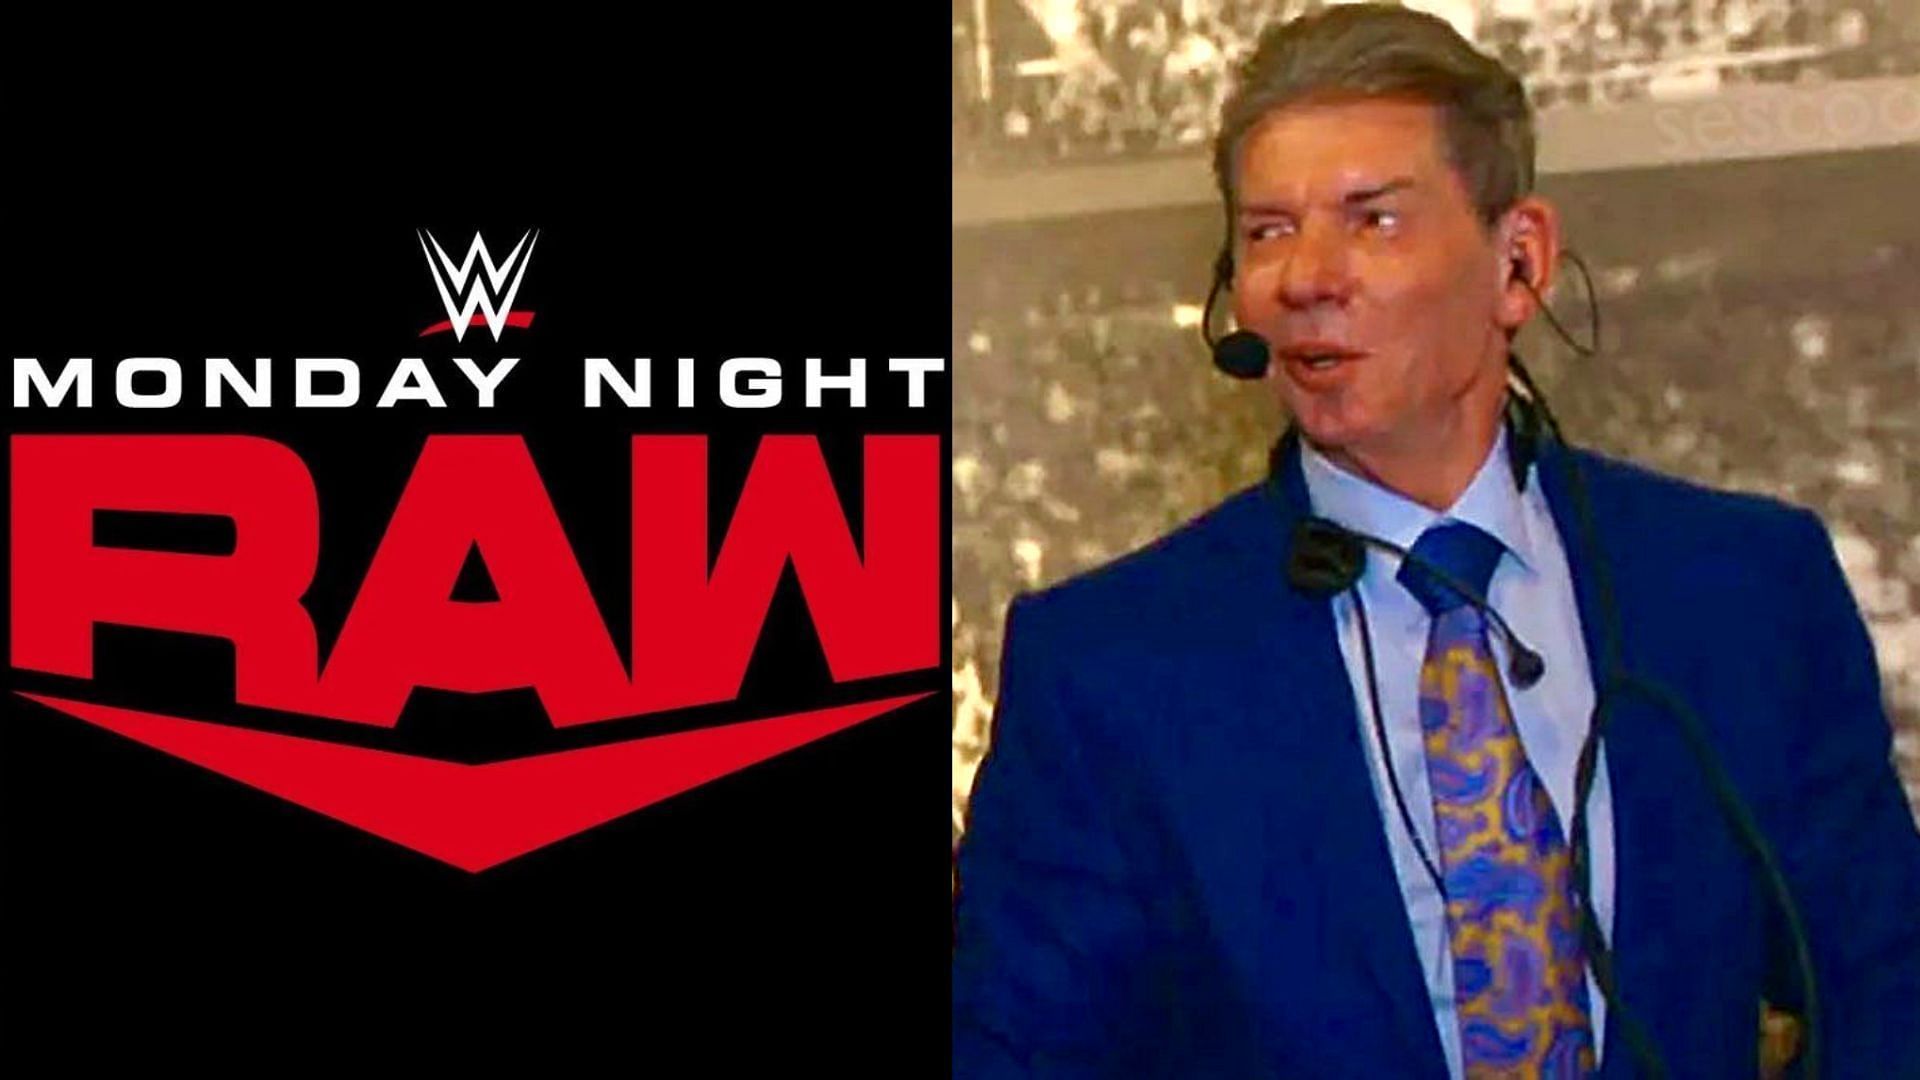 Vince McMahon was backstage on WWE RAW this week